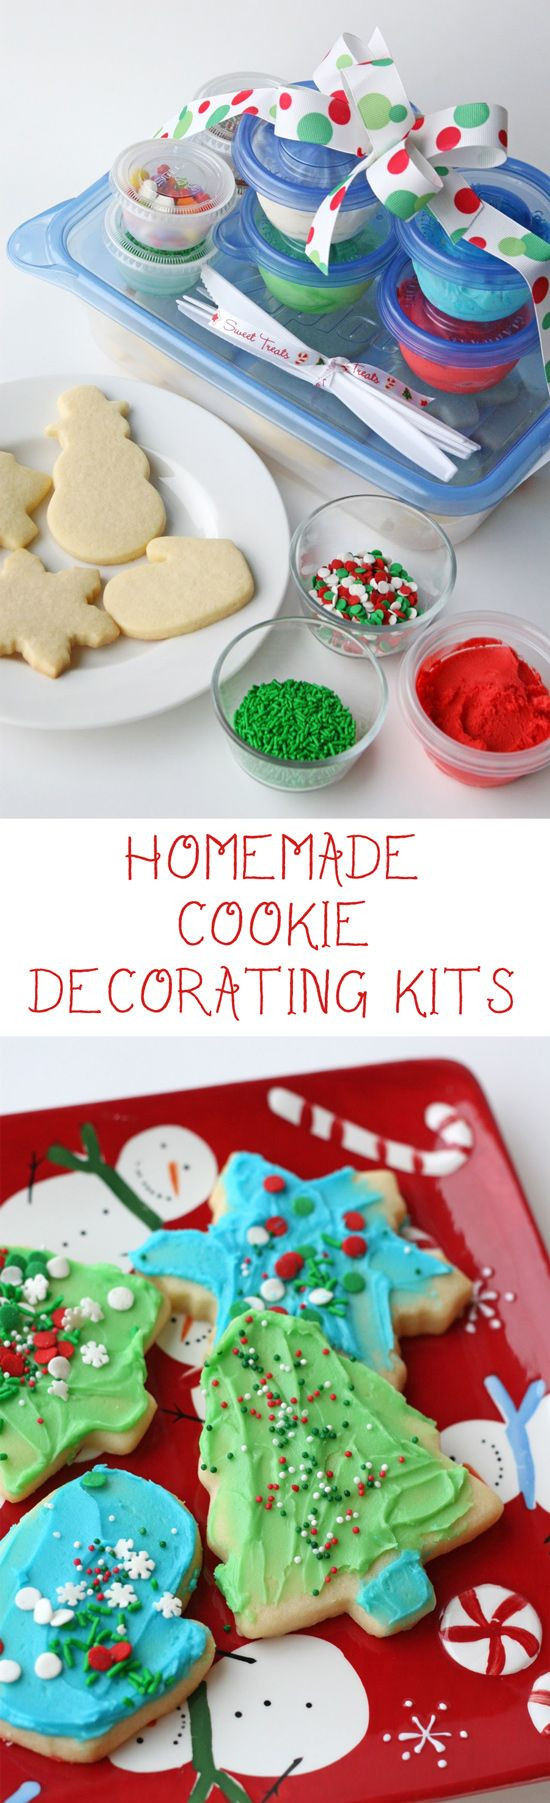 Cookie Decorating Icing Recipe
 Cookie Decorating Kits for Kids and Easy Butter Frosting